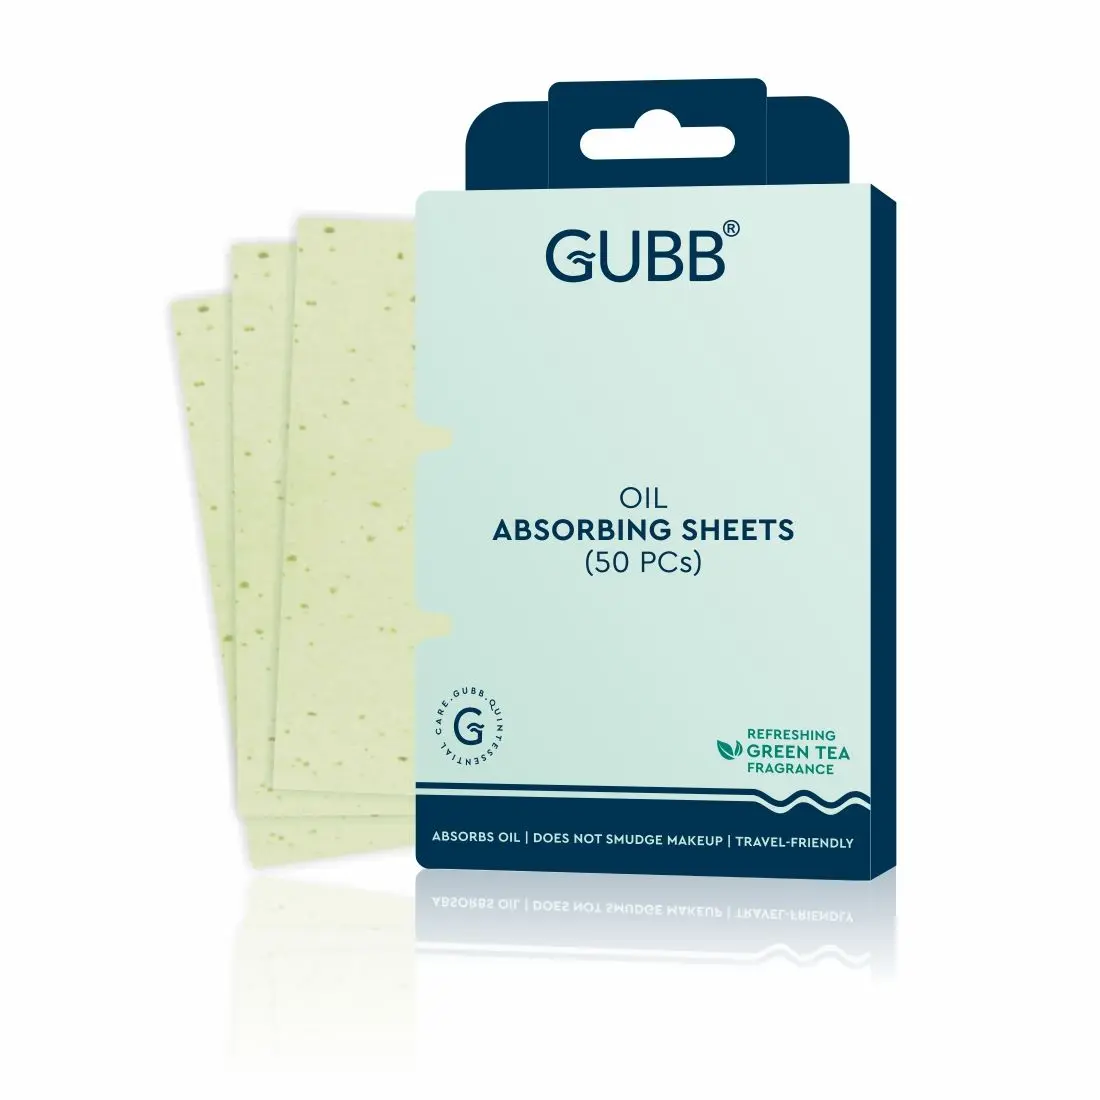 GUBB Blotting Paper for Oily Skin with Green Tea Fragrance - 50 Oil Absorbing Sheets